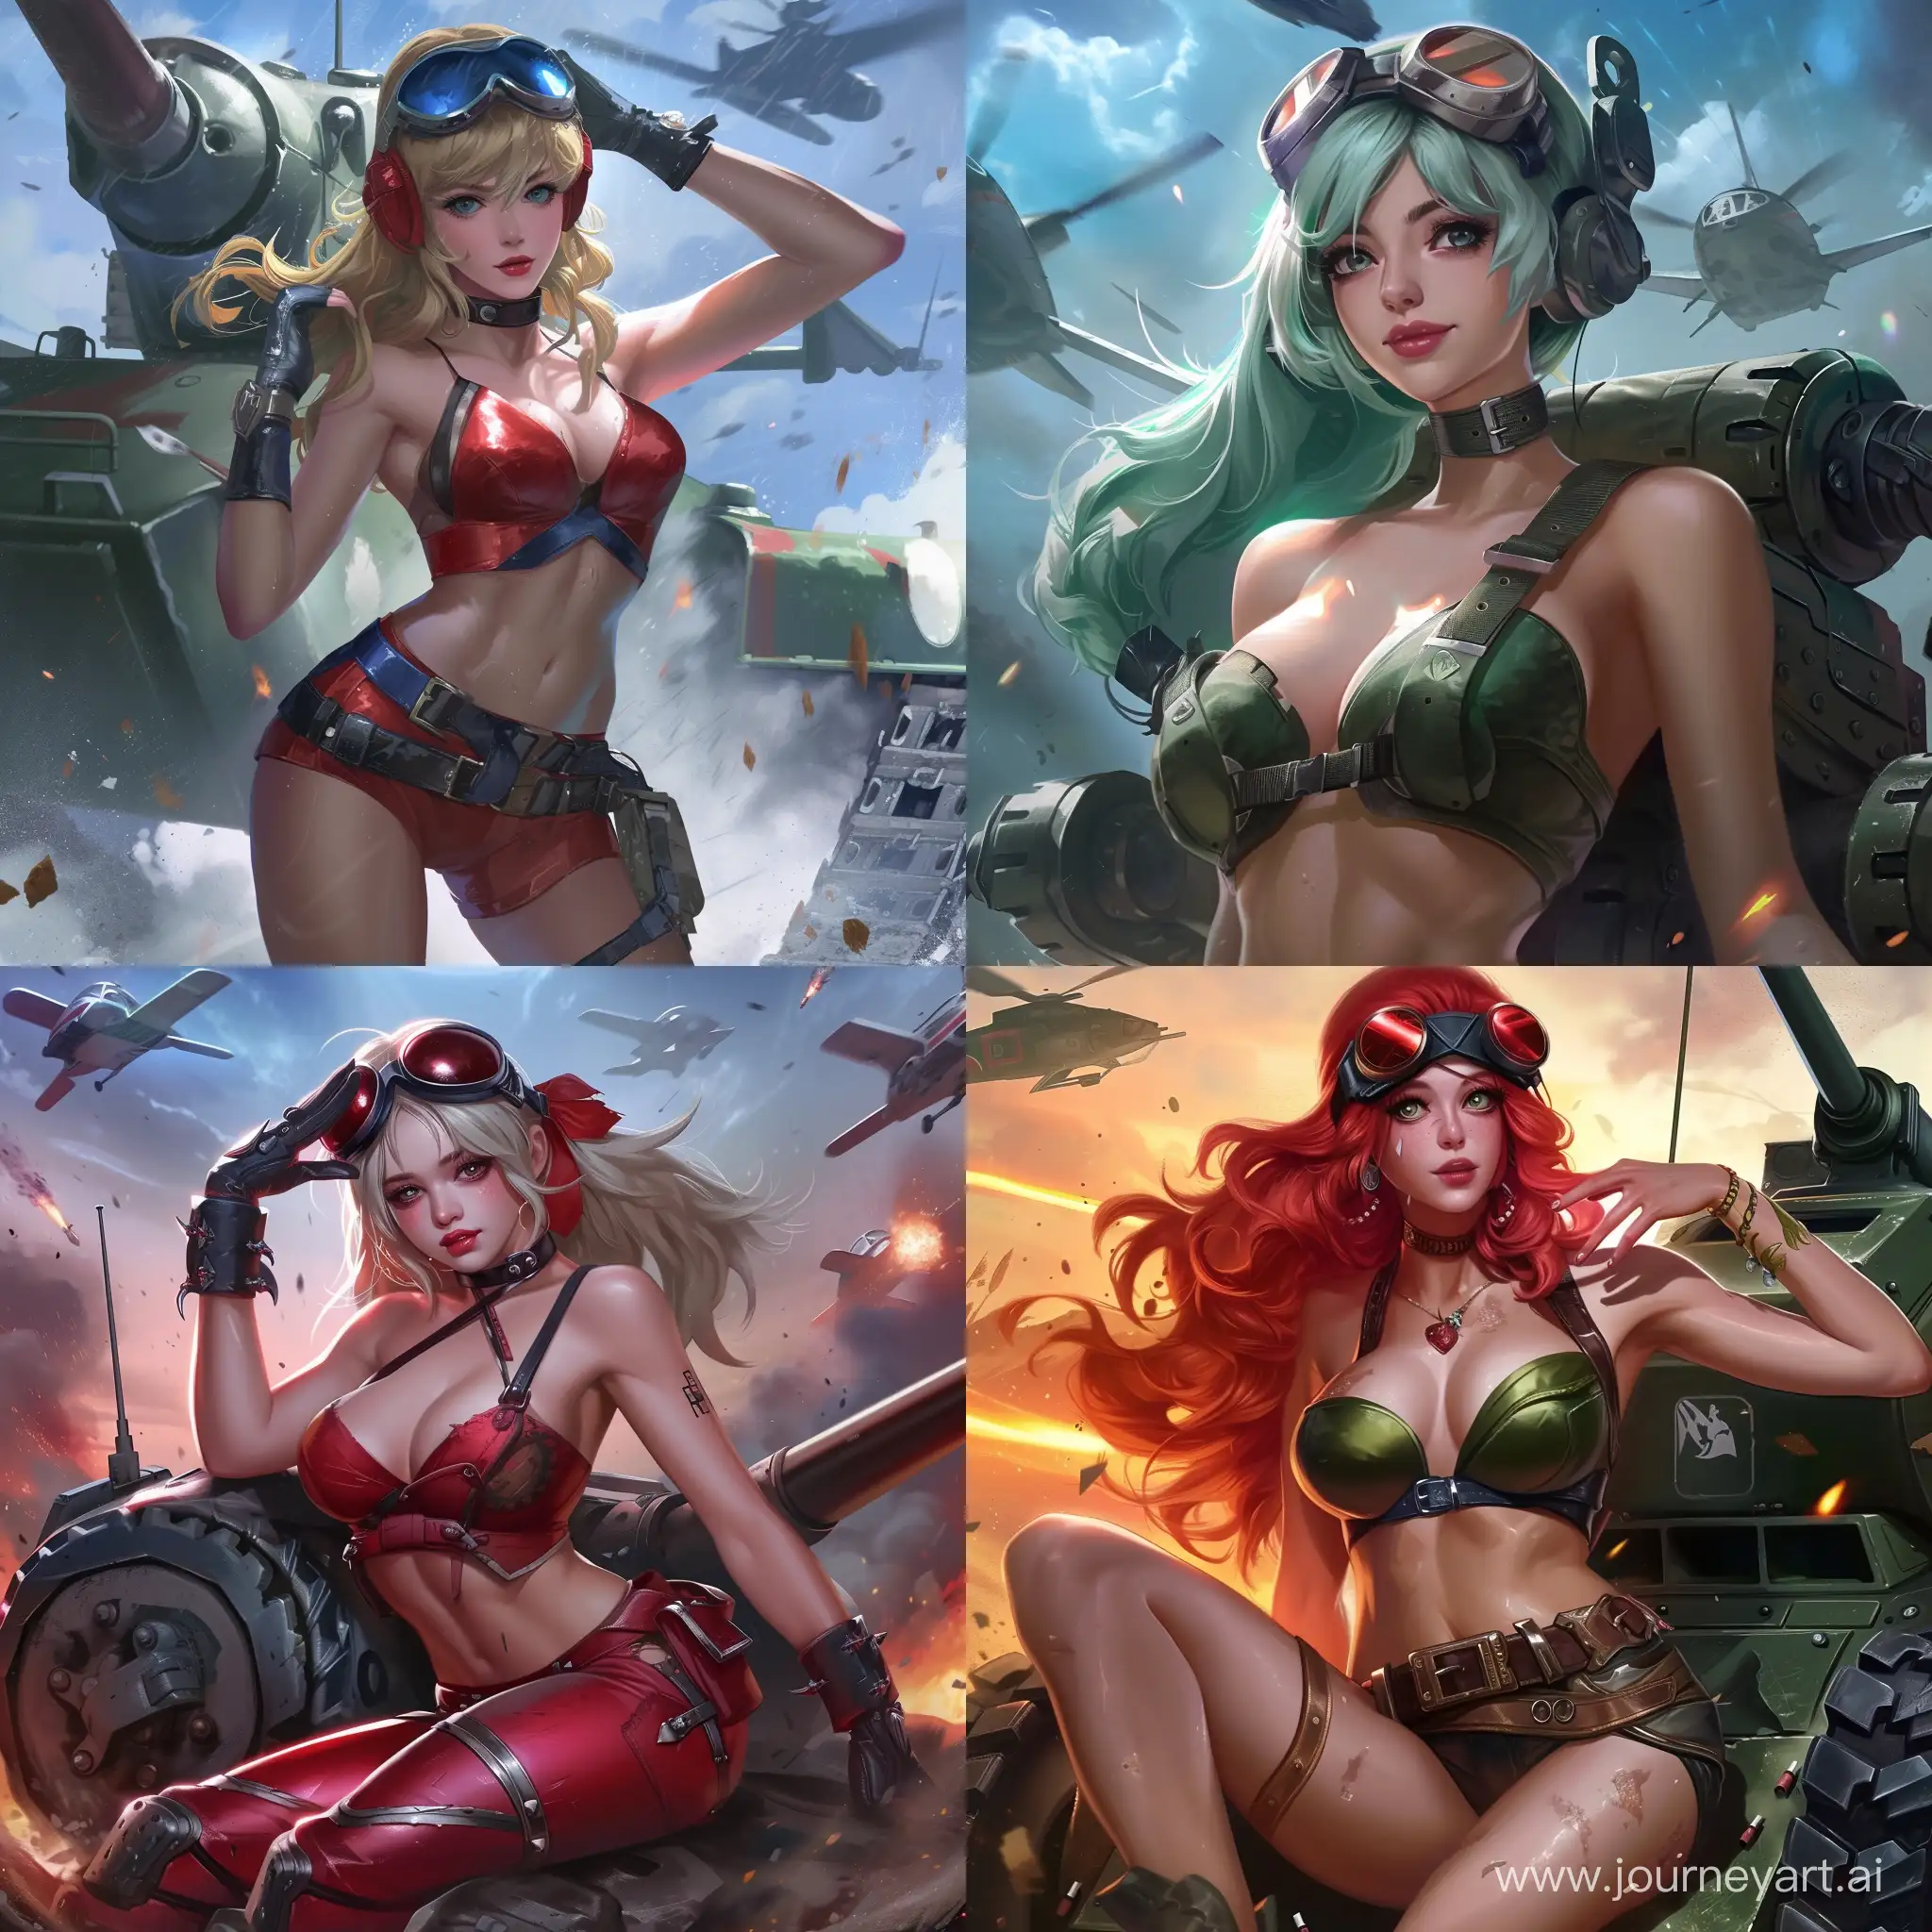 Layla-from-Mobile-Legends-Bang-Bang-in-a-Sexy-Tank-Realistic-Fan-Art